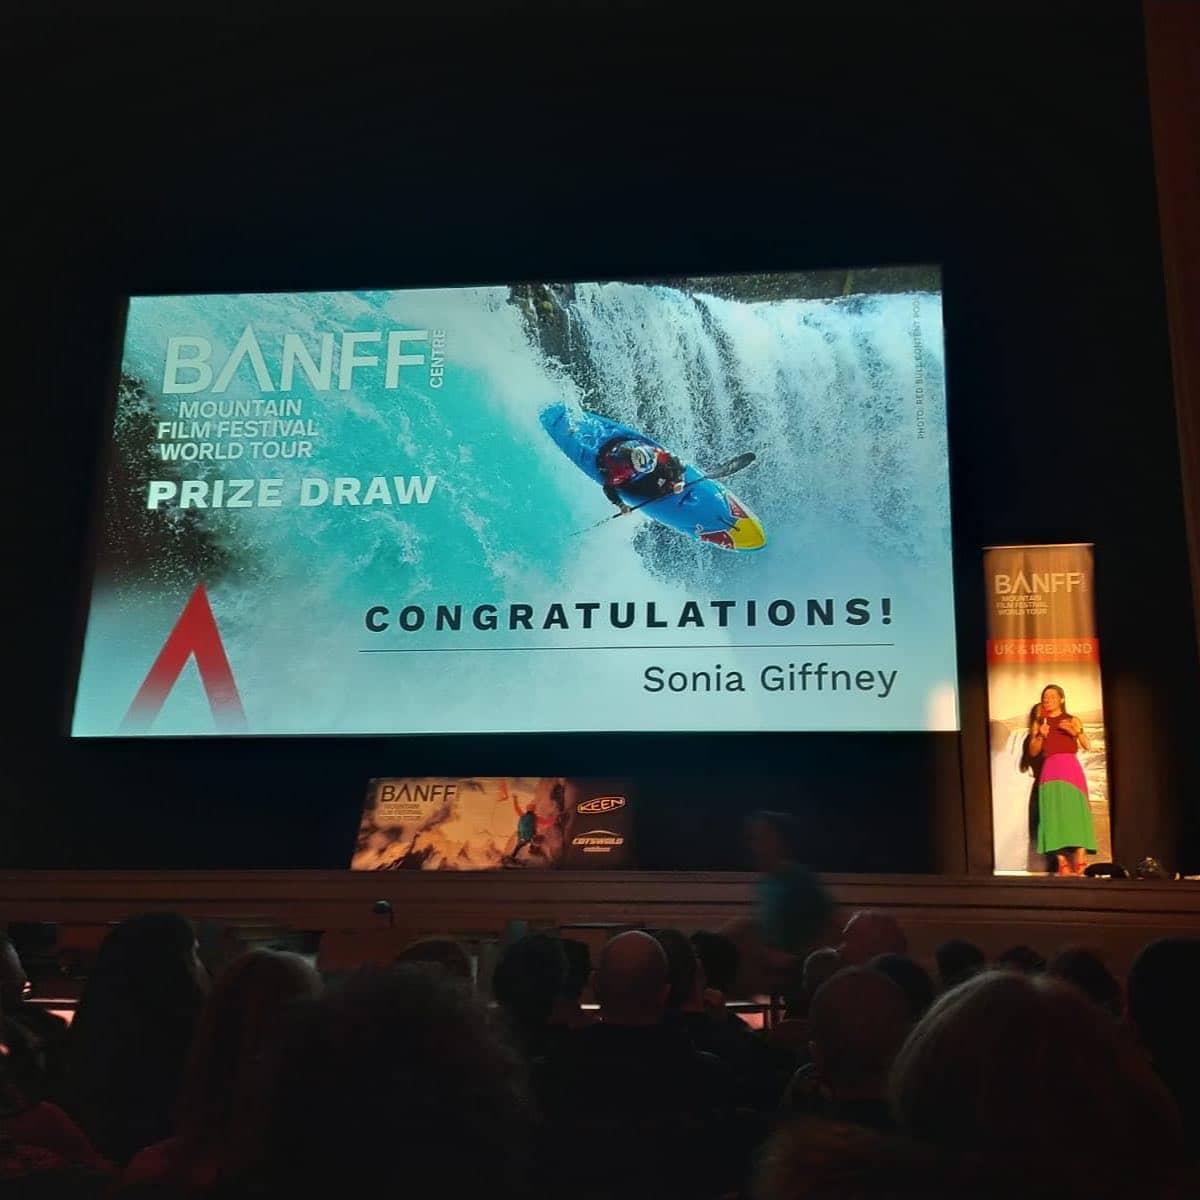 Congratulations Sonia Giffney who won a Peak District Challenge entry at the Banff Film Festival ...